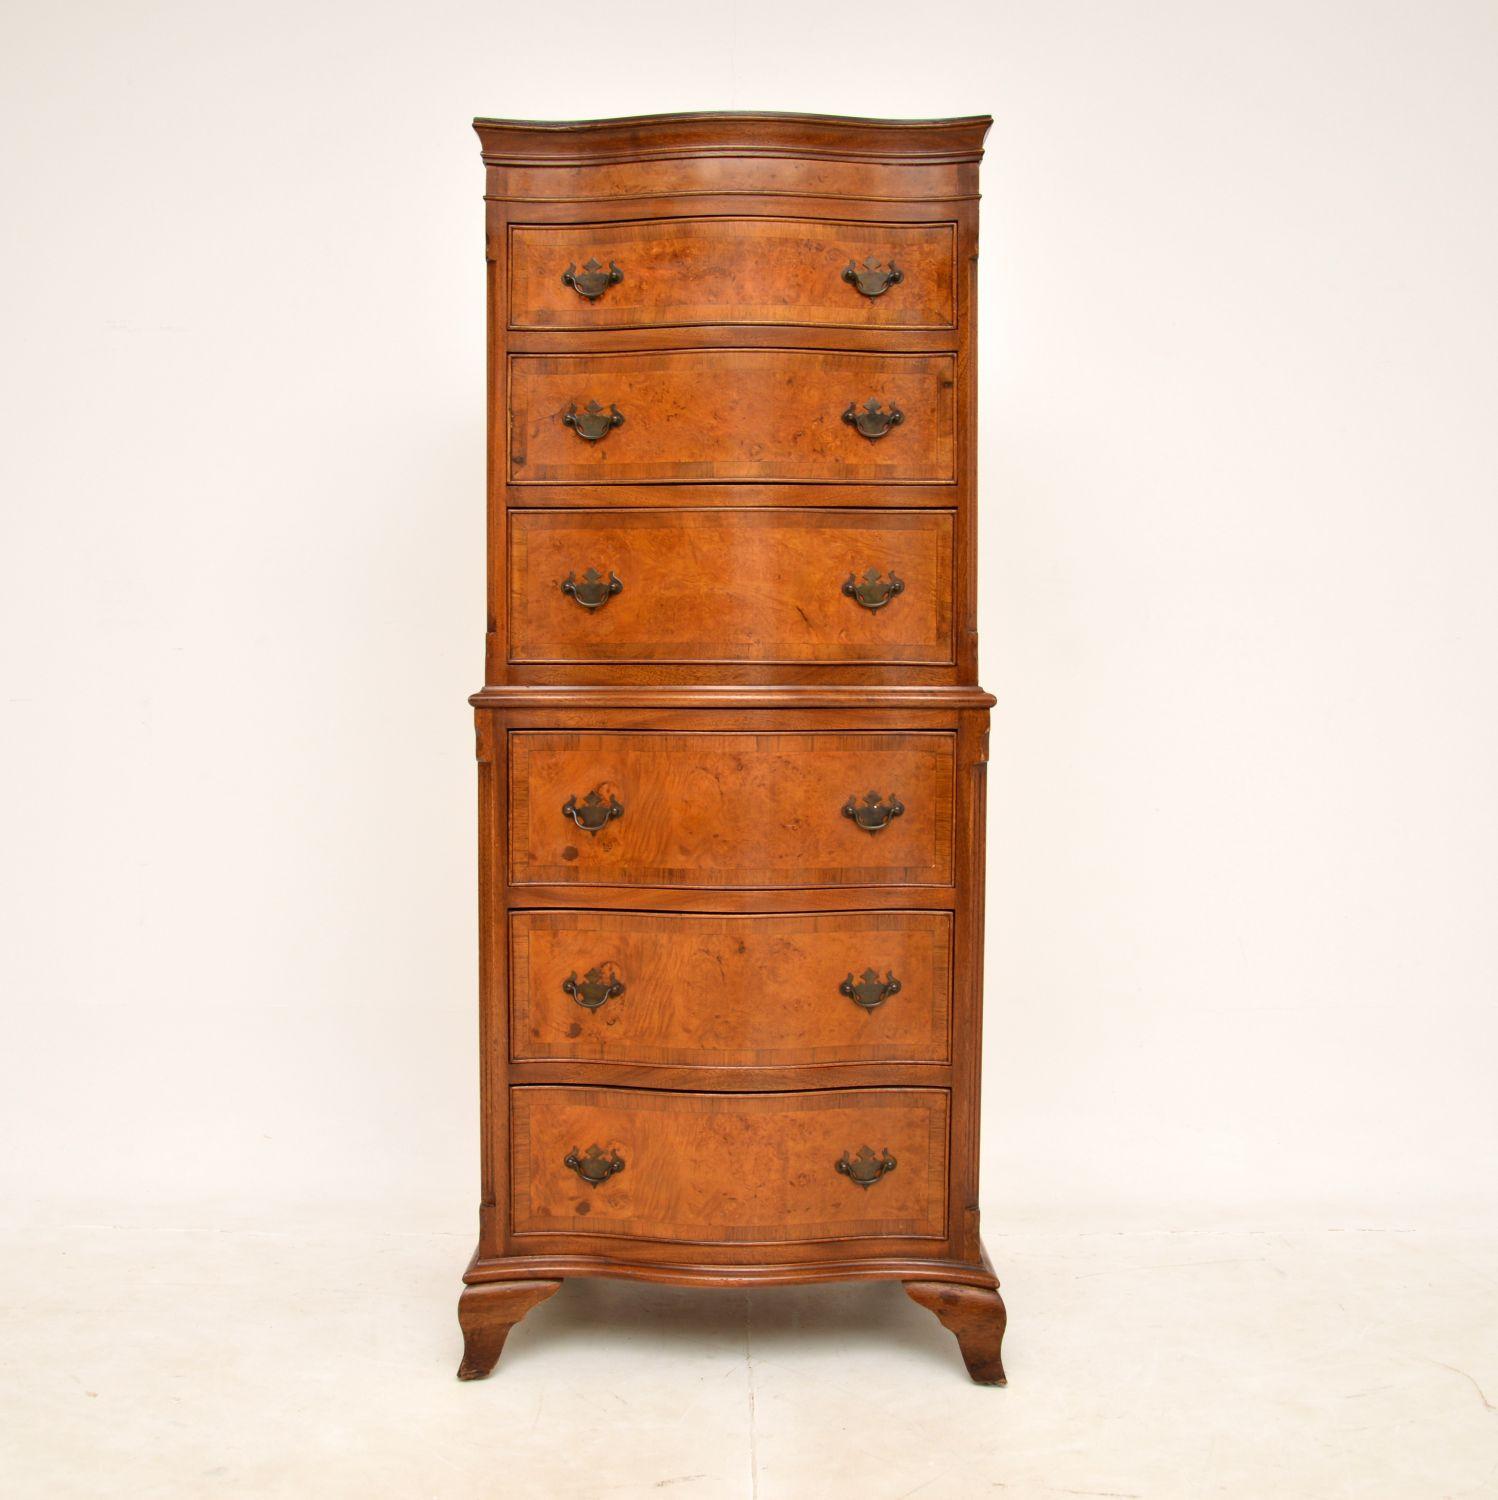 A smart and very well made antique walnut chest on chest in walnut, with a serpentine shaped front. This was made in England, it dates from around the 1900-1910 period.

It is of superb quality and is a very useful size. There is lots of storage